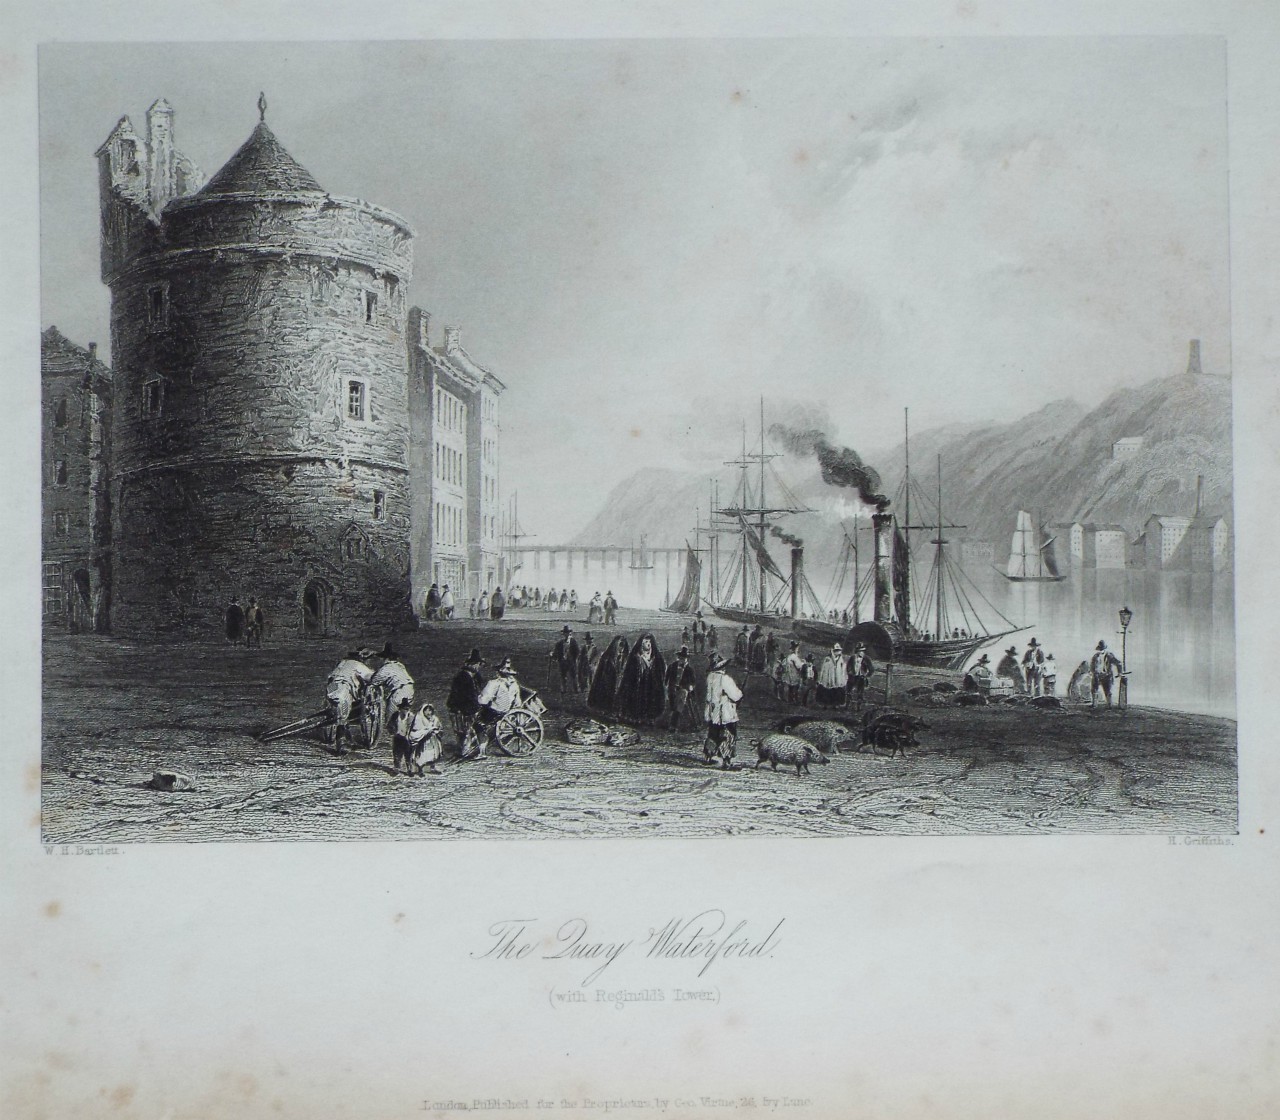 Print - The Quay, Waterford (from Reginald's Tower)